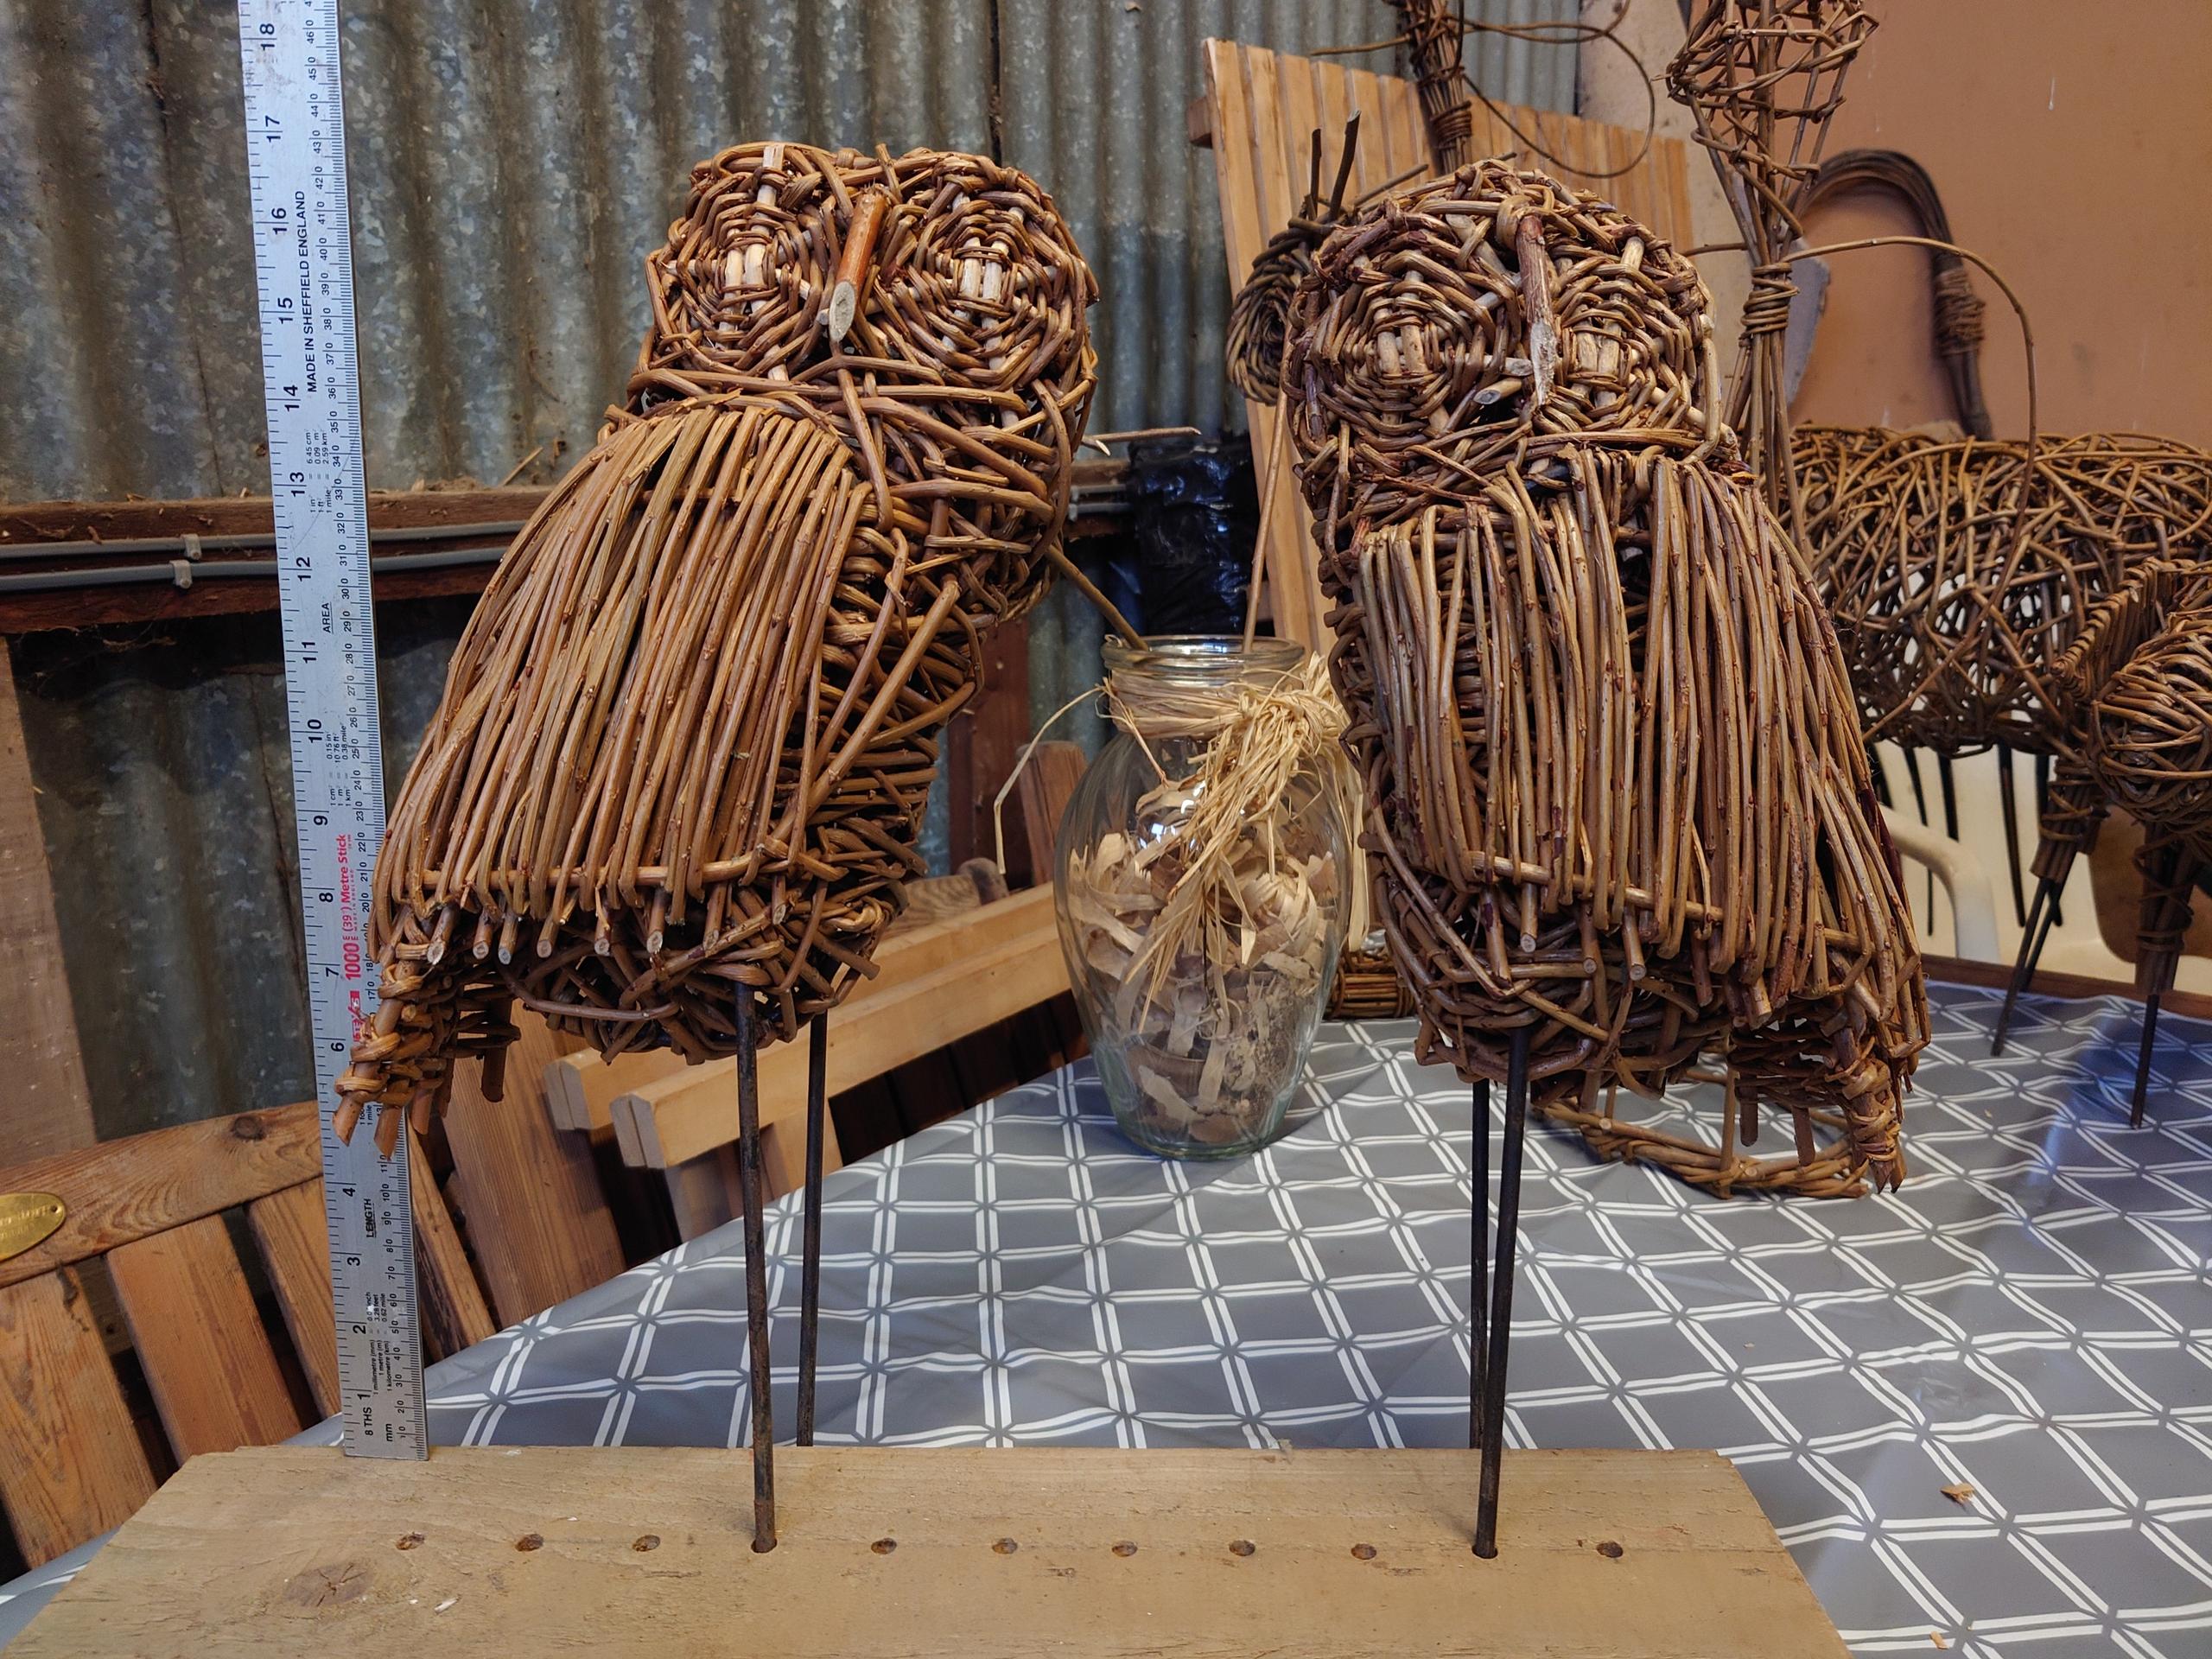 Willow Tawny Owls